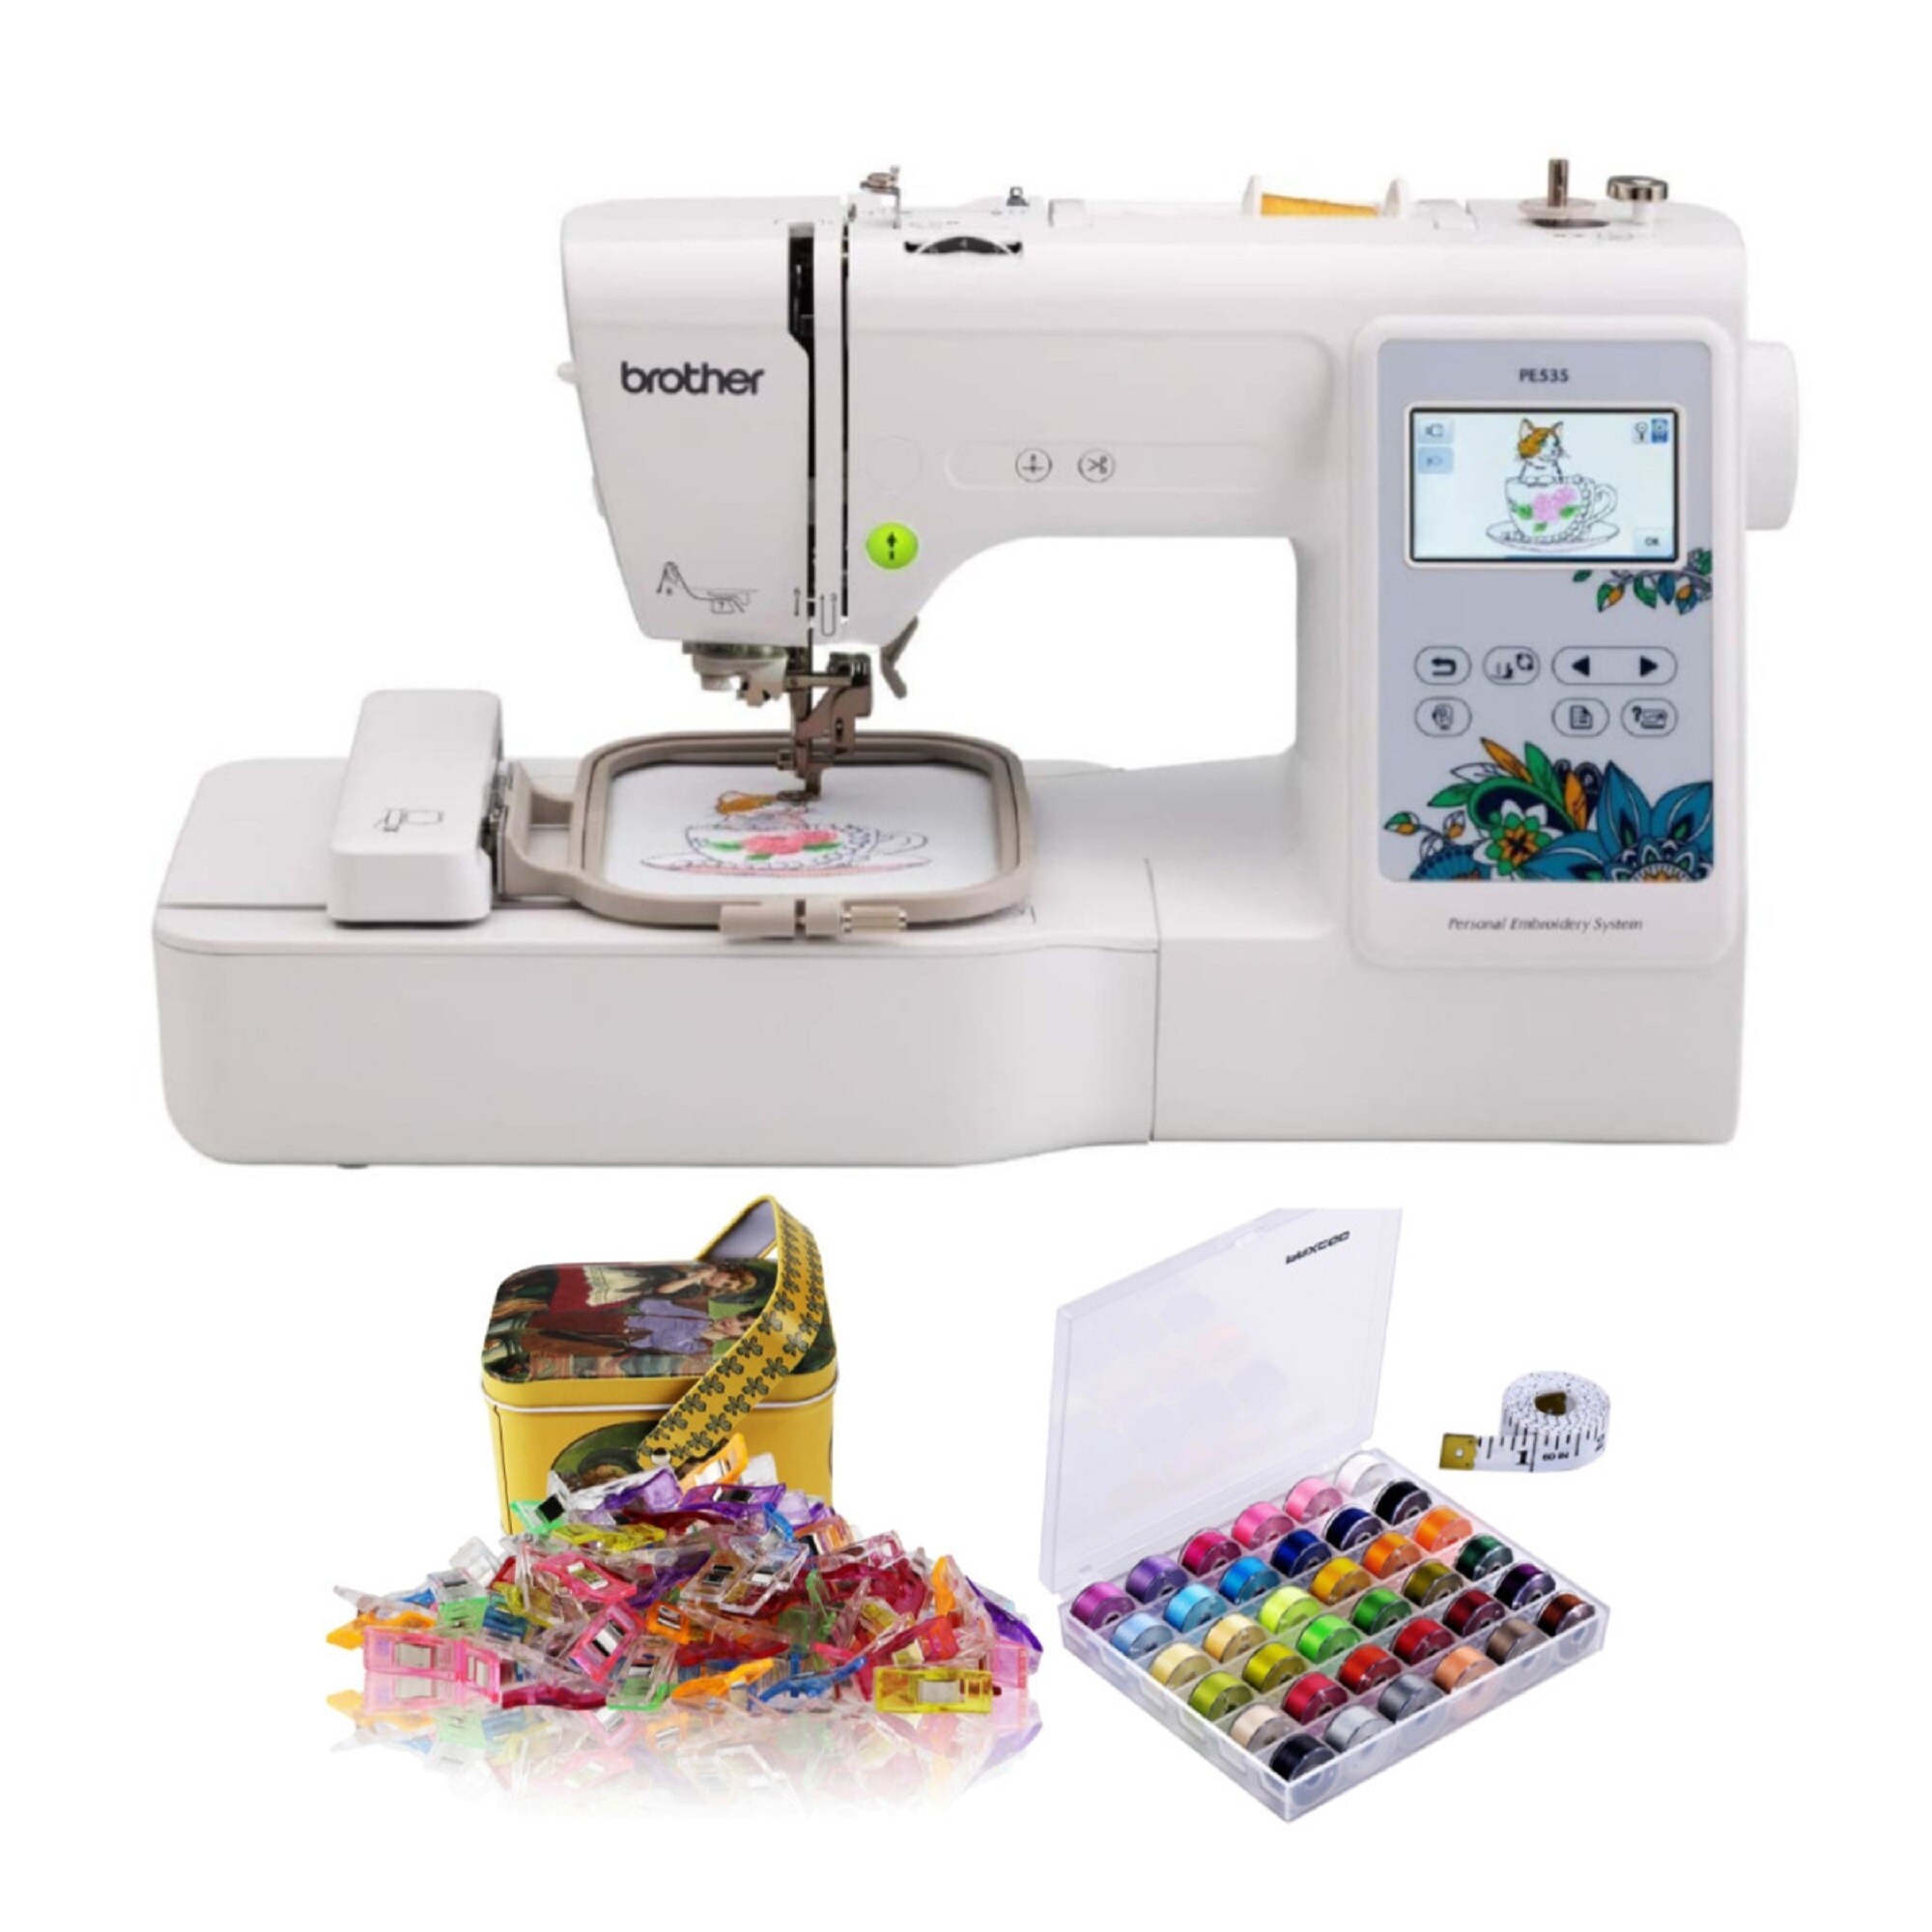 Brother 4x4-Inch Embroidery Machine w/ Color Touch LCD Bundle -  Brother International, PE535